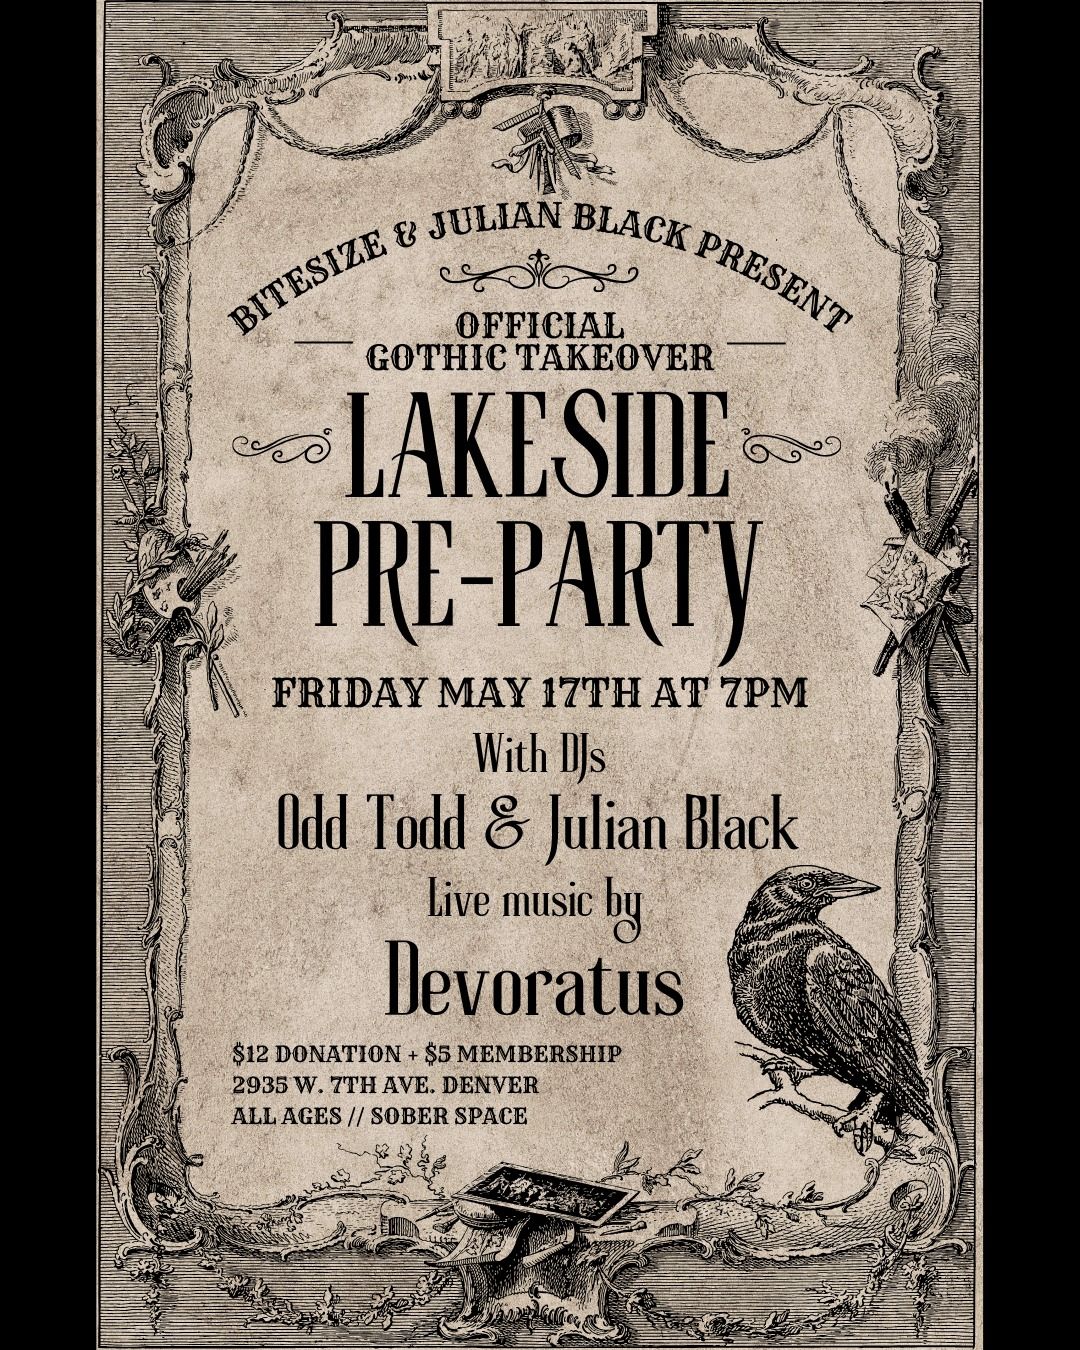 The Gothic Takeover at Lakeside PRE-PARTY